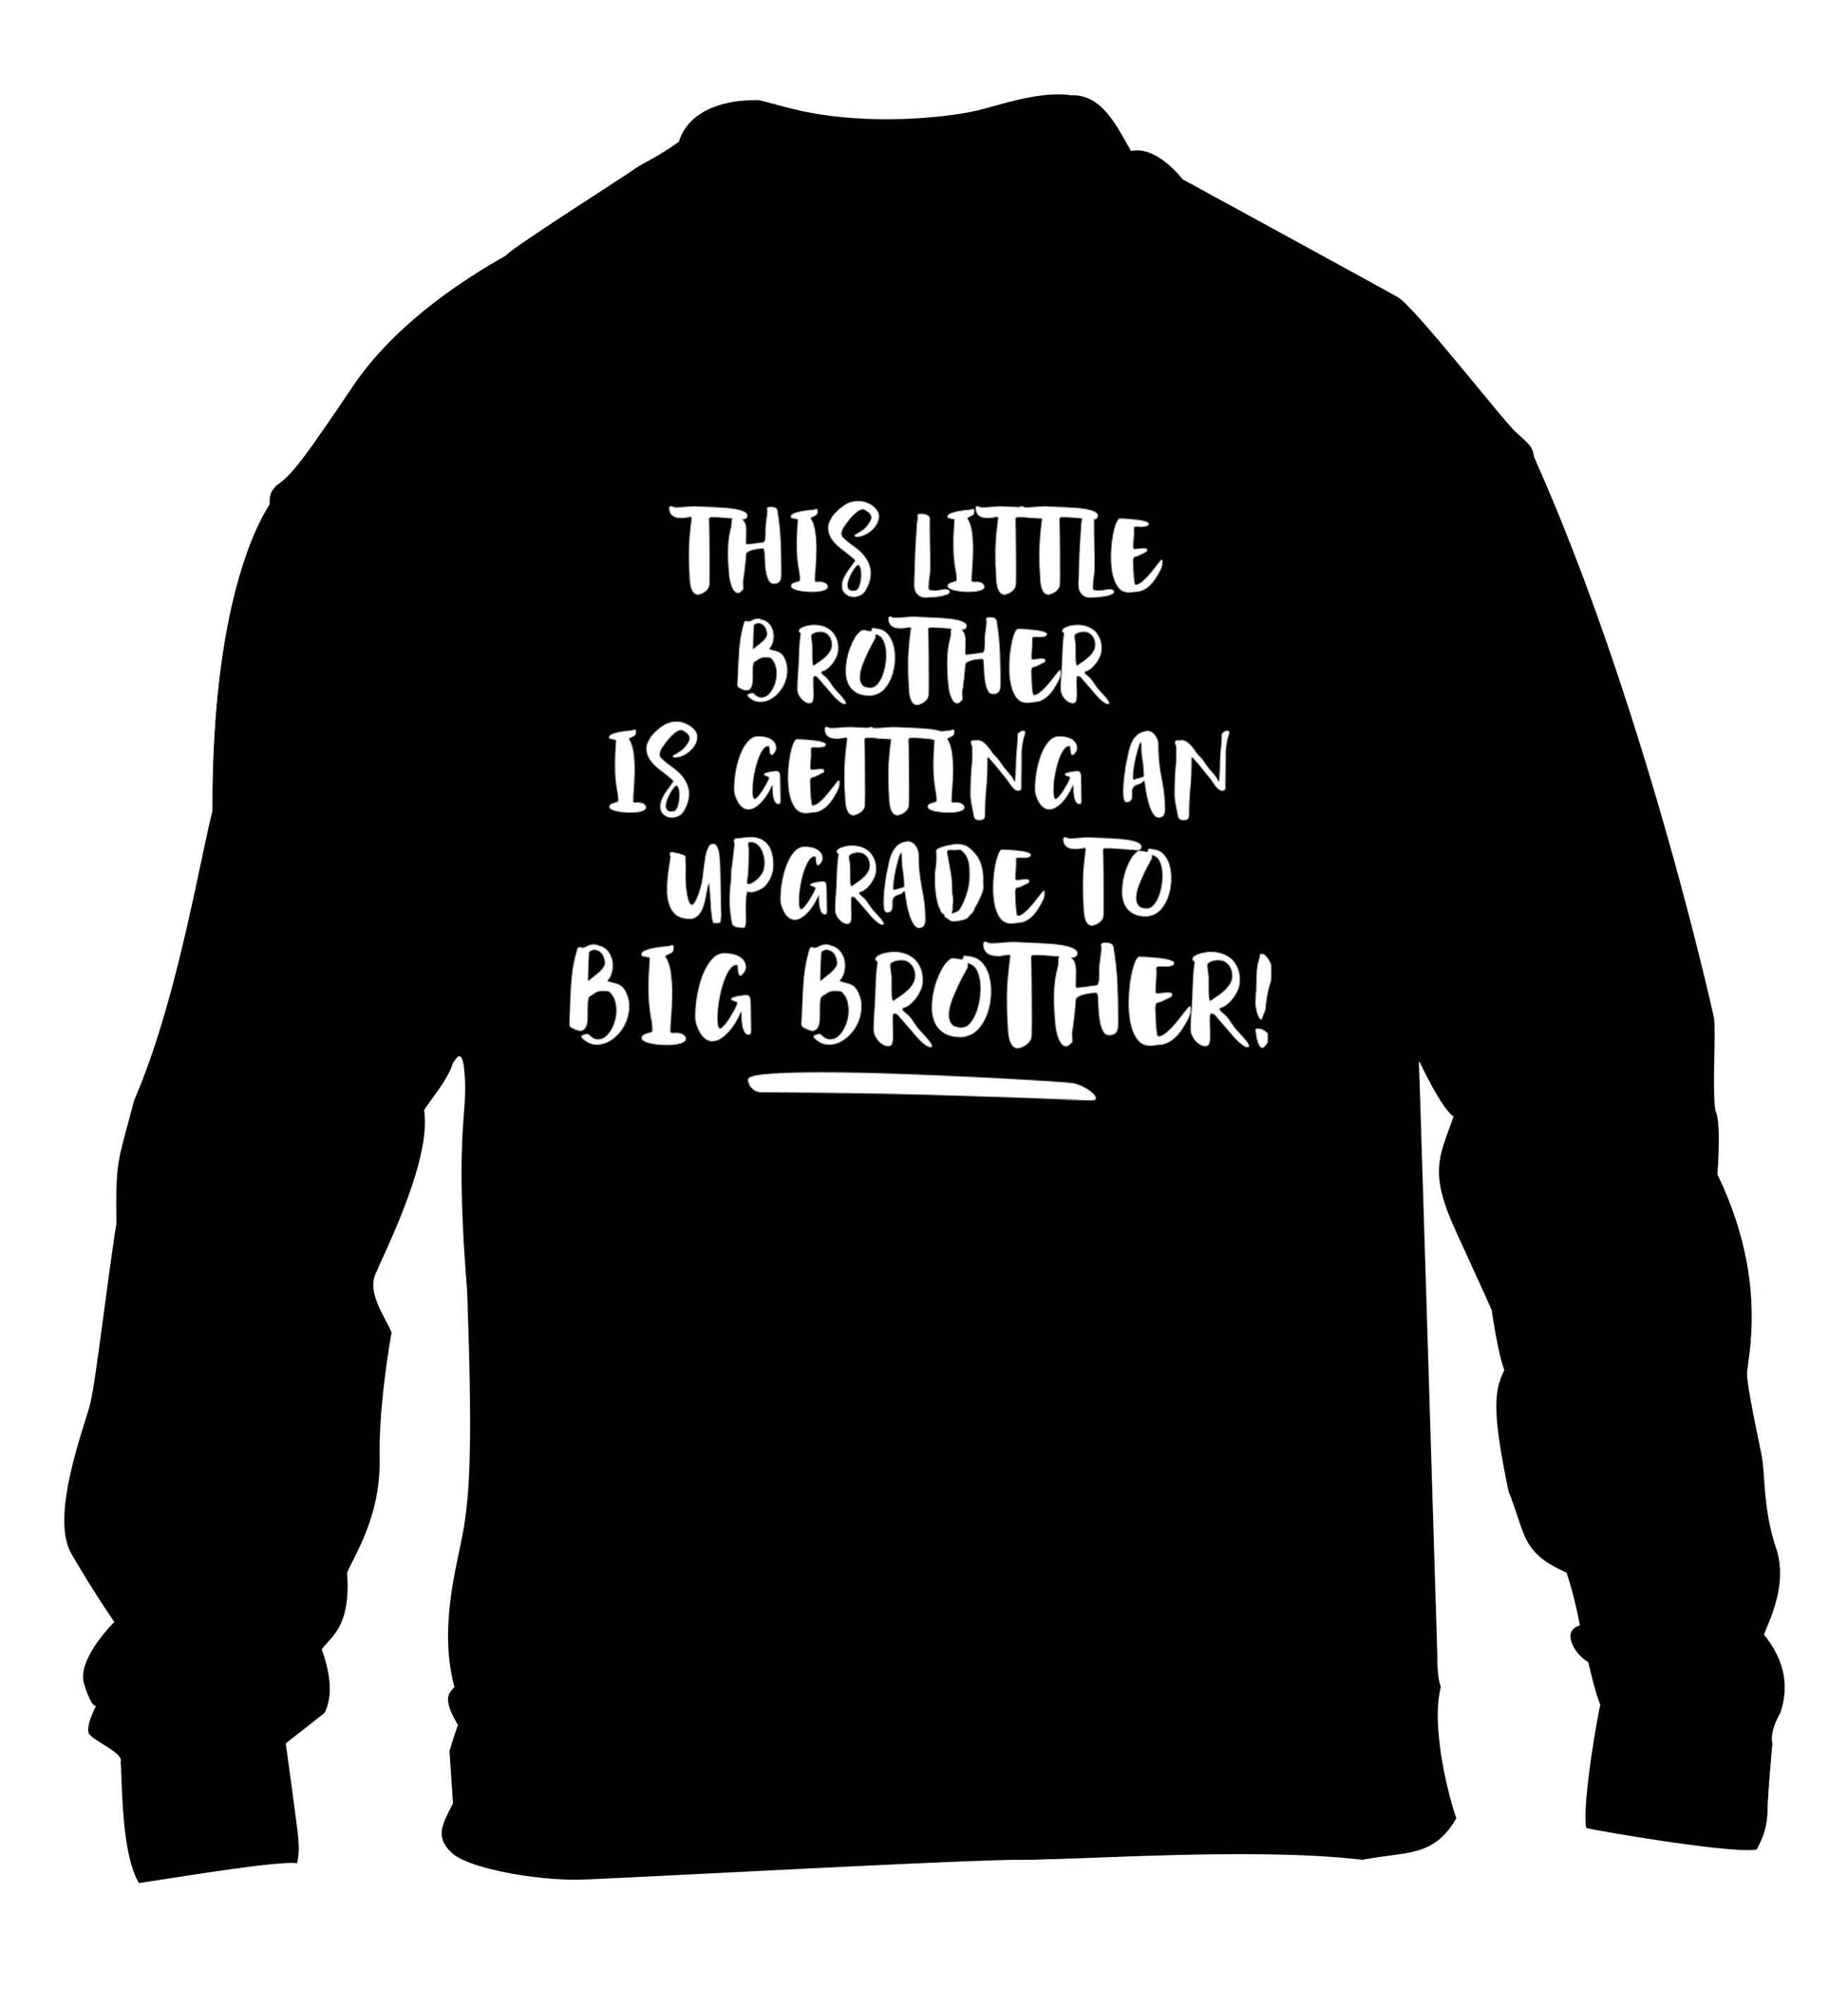 This little brother is getting an upgrade to big brother! children's black sweater 12-13 Years